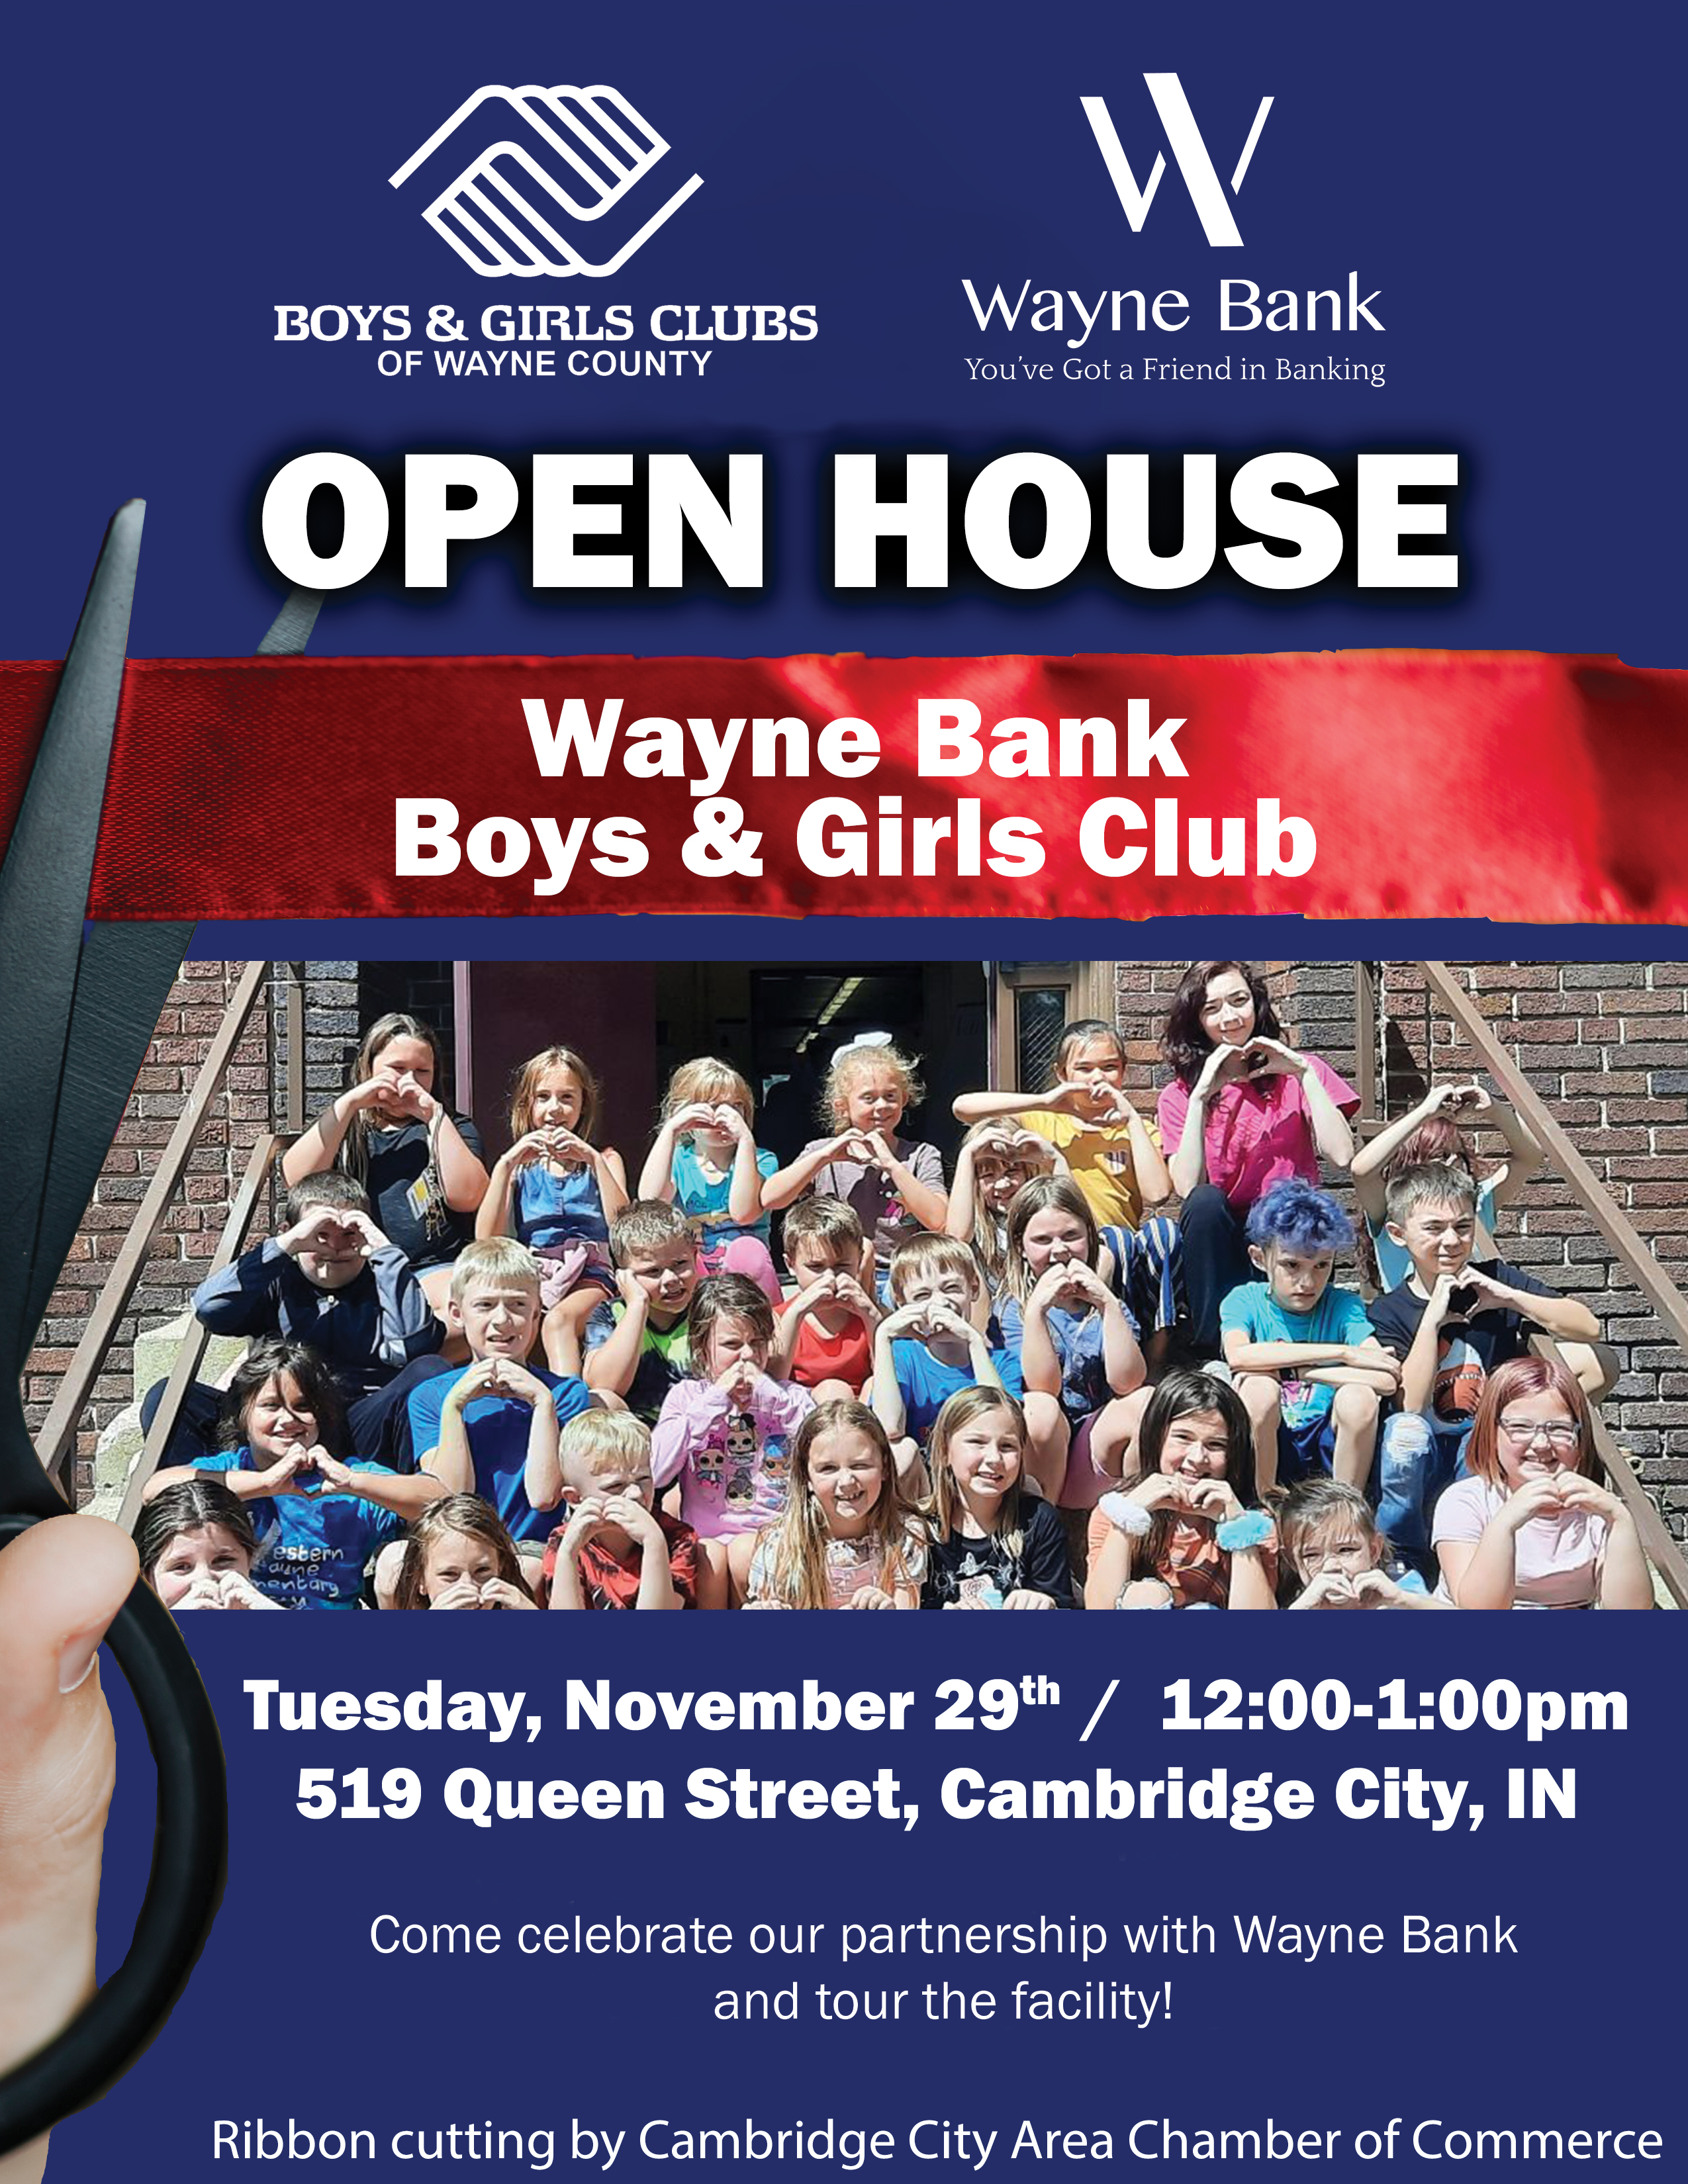 open house flyer invitation to boys & girls clubs of wayne county